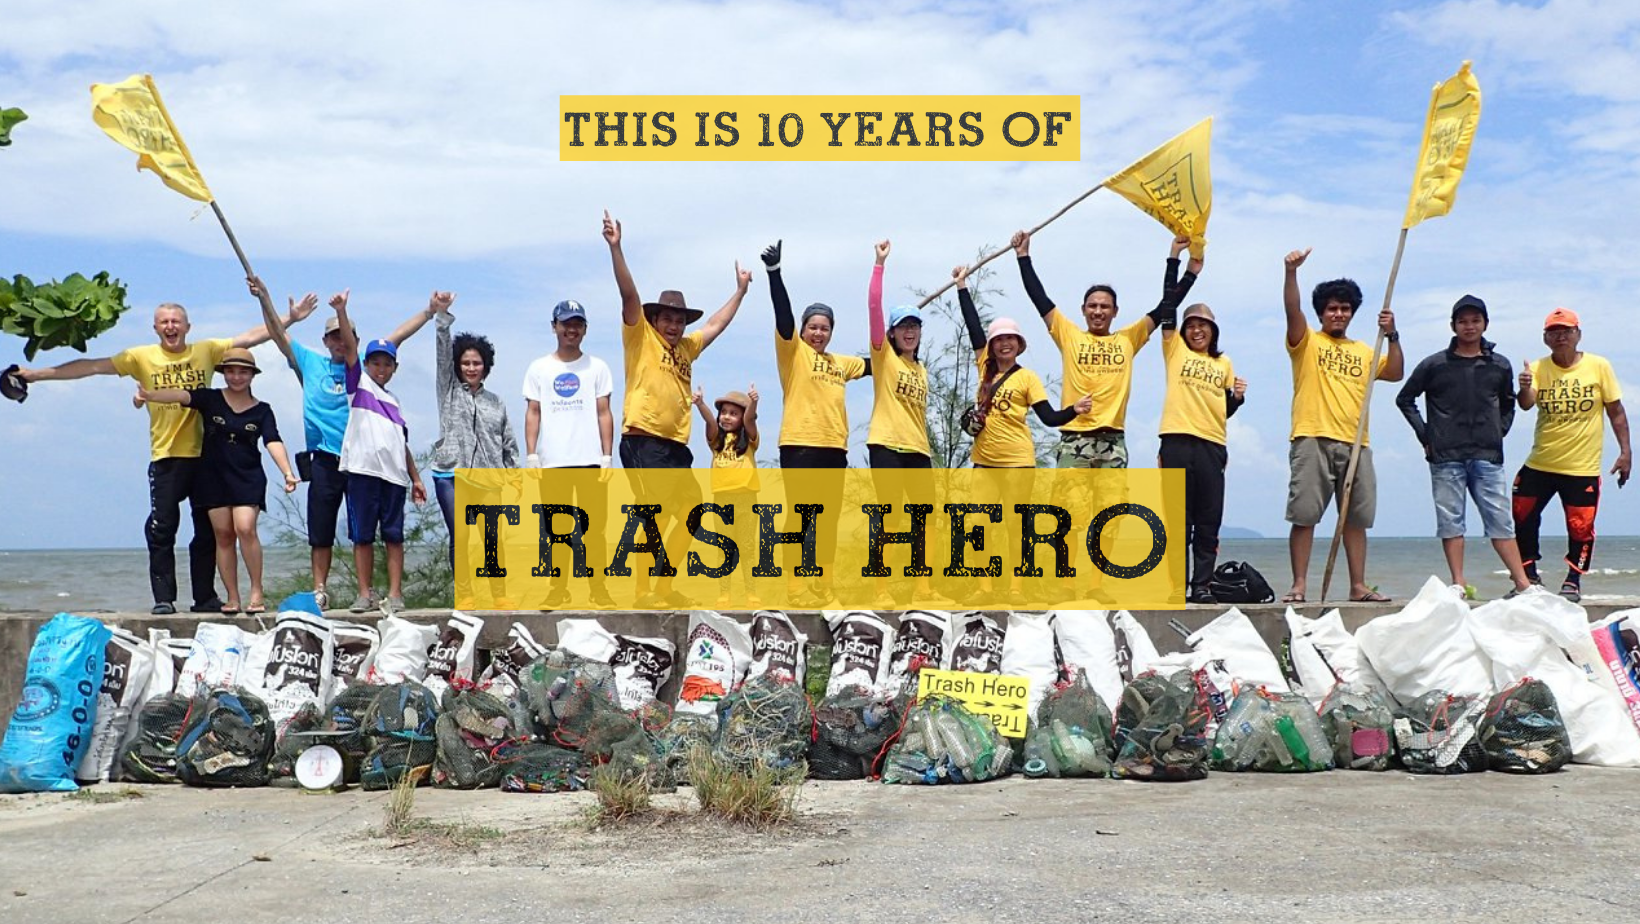 From a weekly cleanup to a global movement: ten years of Trash Hero